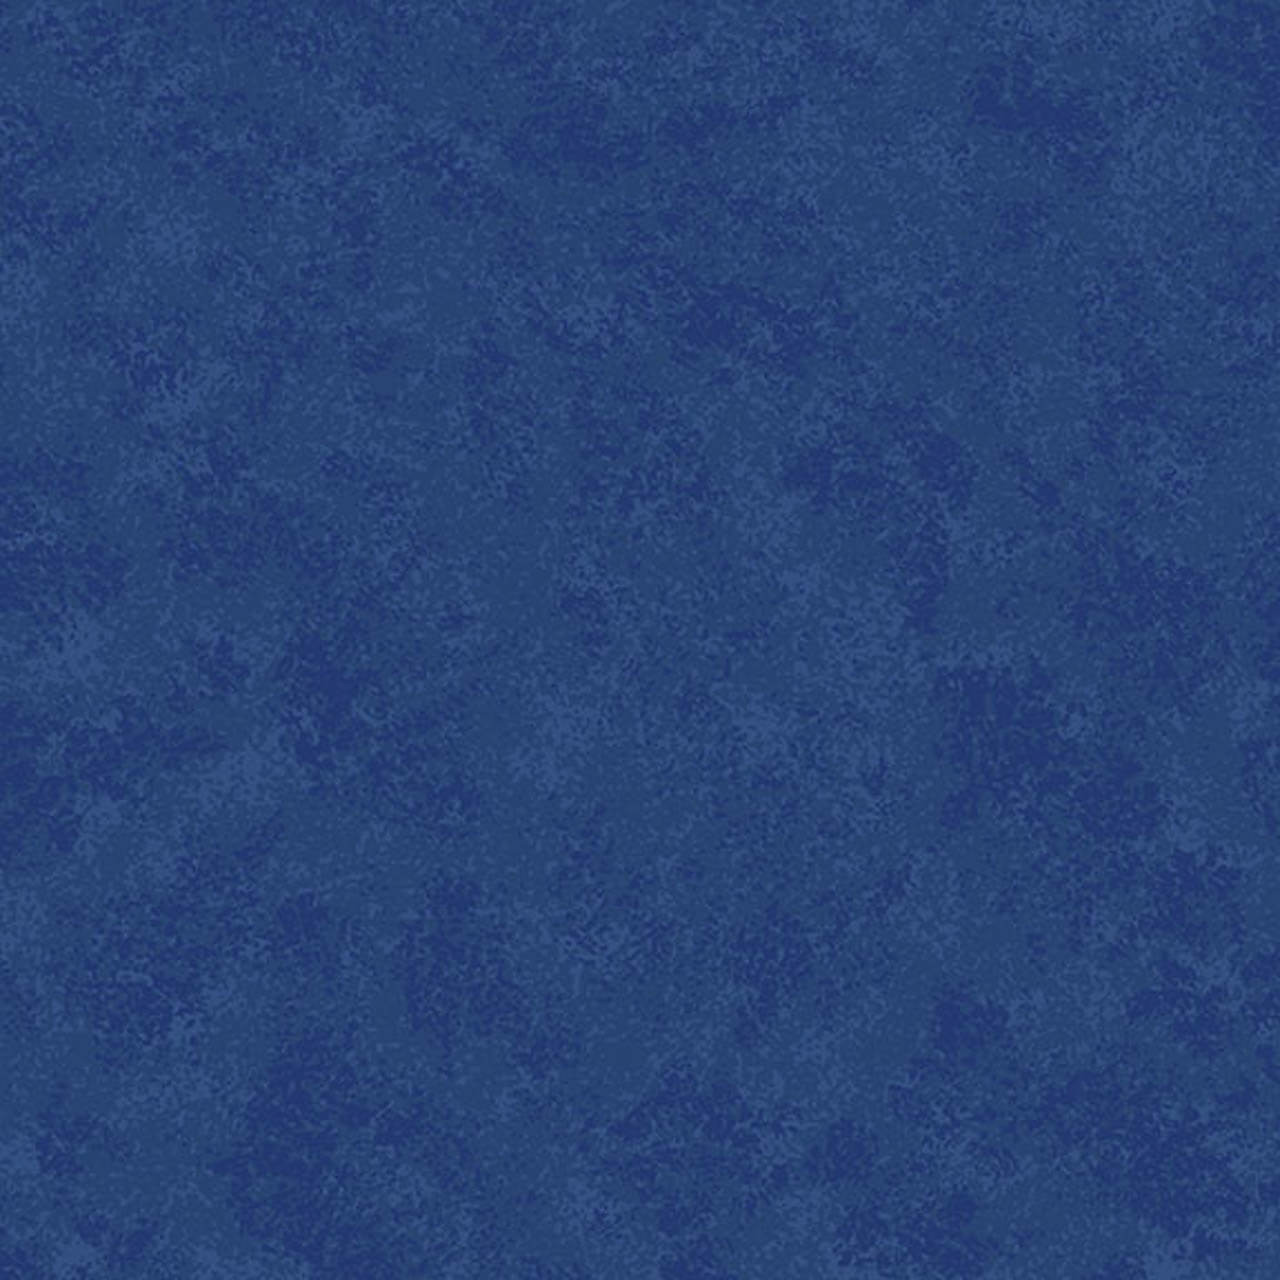 A close-up texture of Makower's Cobalt Blue fabric from the Spraytime collection, showing the rich tonal variation and quality.